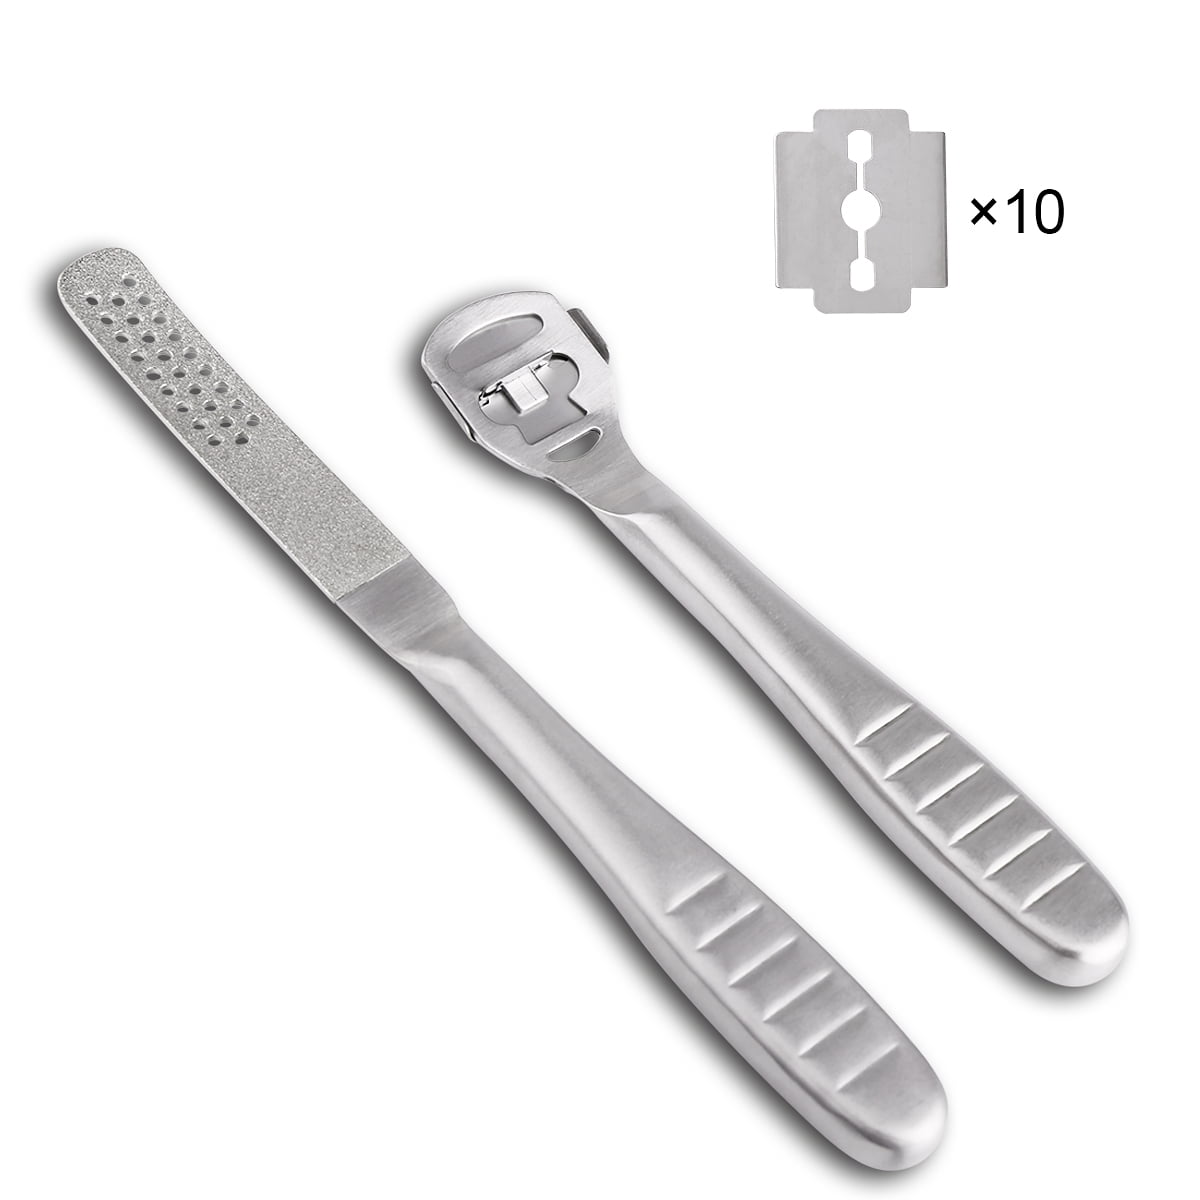 Pedicure Foot File Callus Remover Set - Large Stainless Steel Foot Scraper, Remove  Hard Skin, Practical and Professional Foot Care File, Suitable for Dry and  Wet Feet (With 10pcs Blade) - Walmart.com